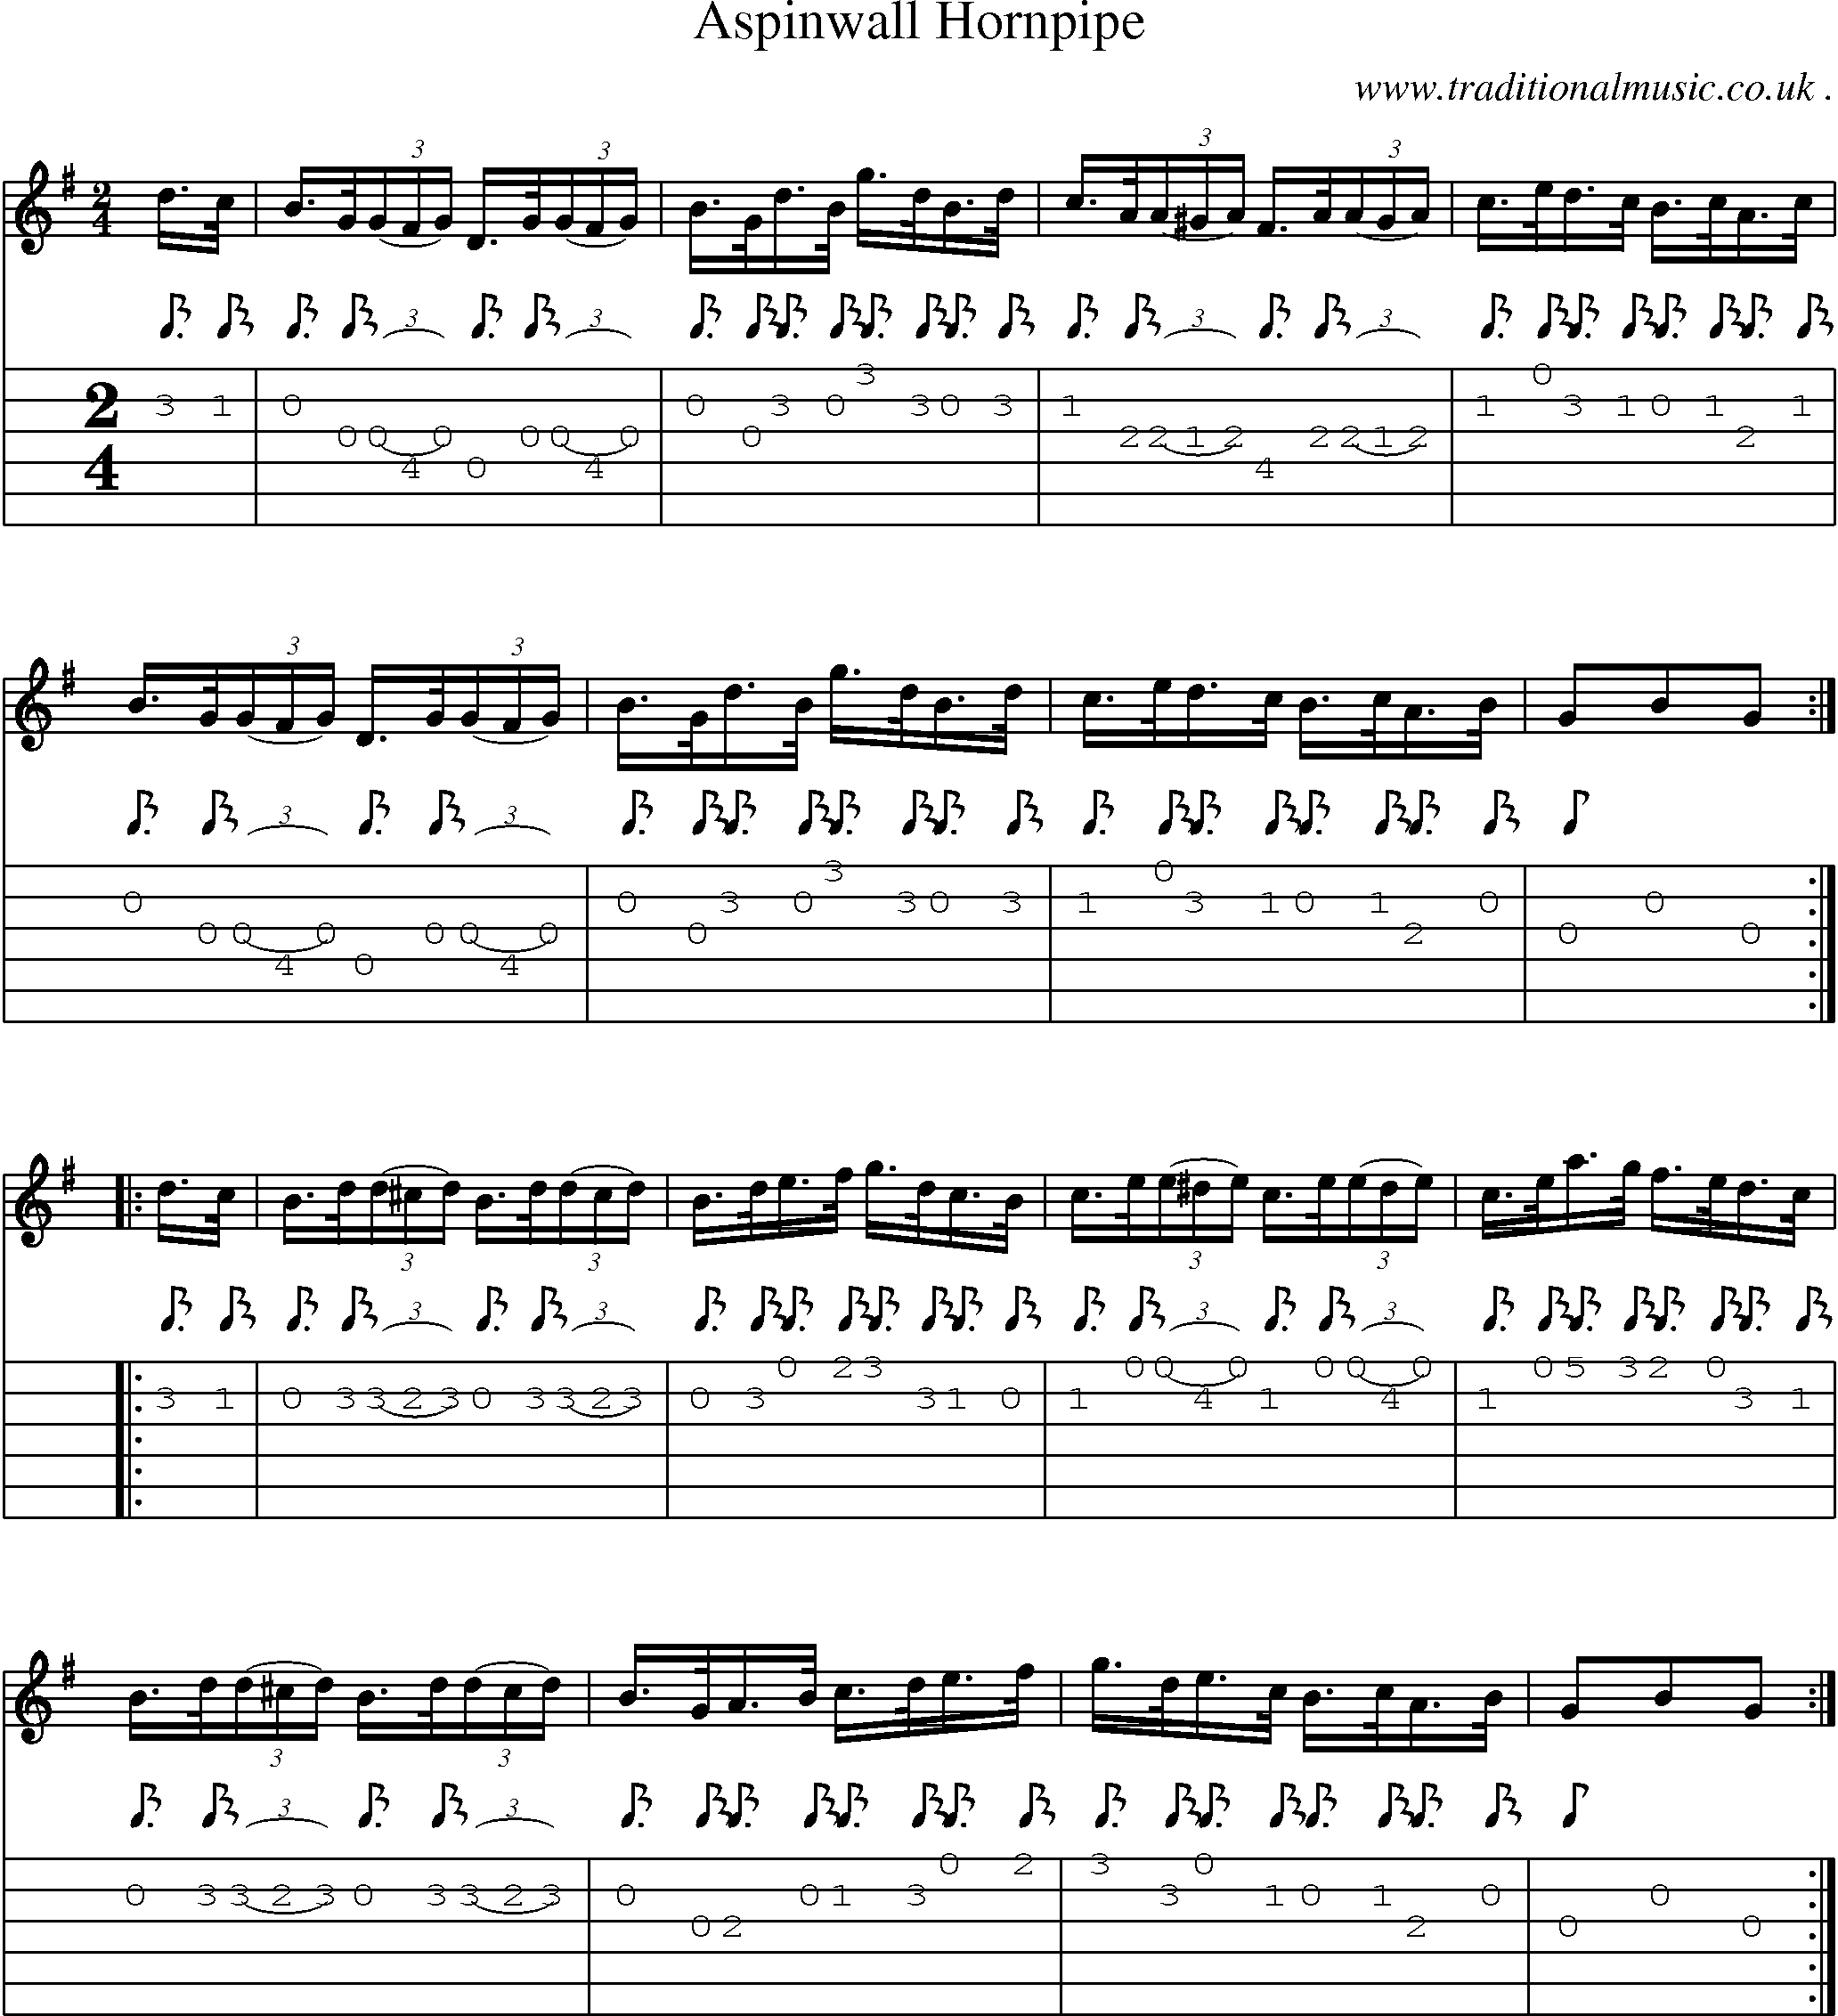 Sheet-Music and Guitar Tabs for Aspinwall Hornpipe